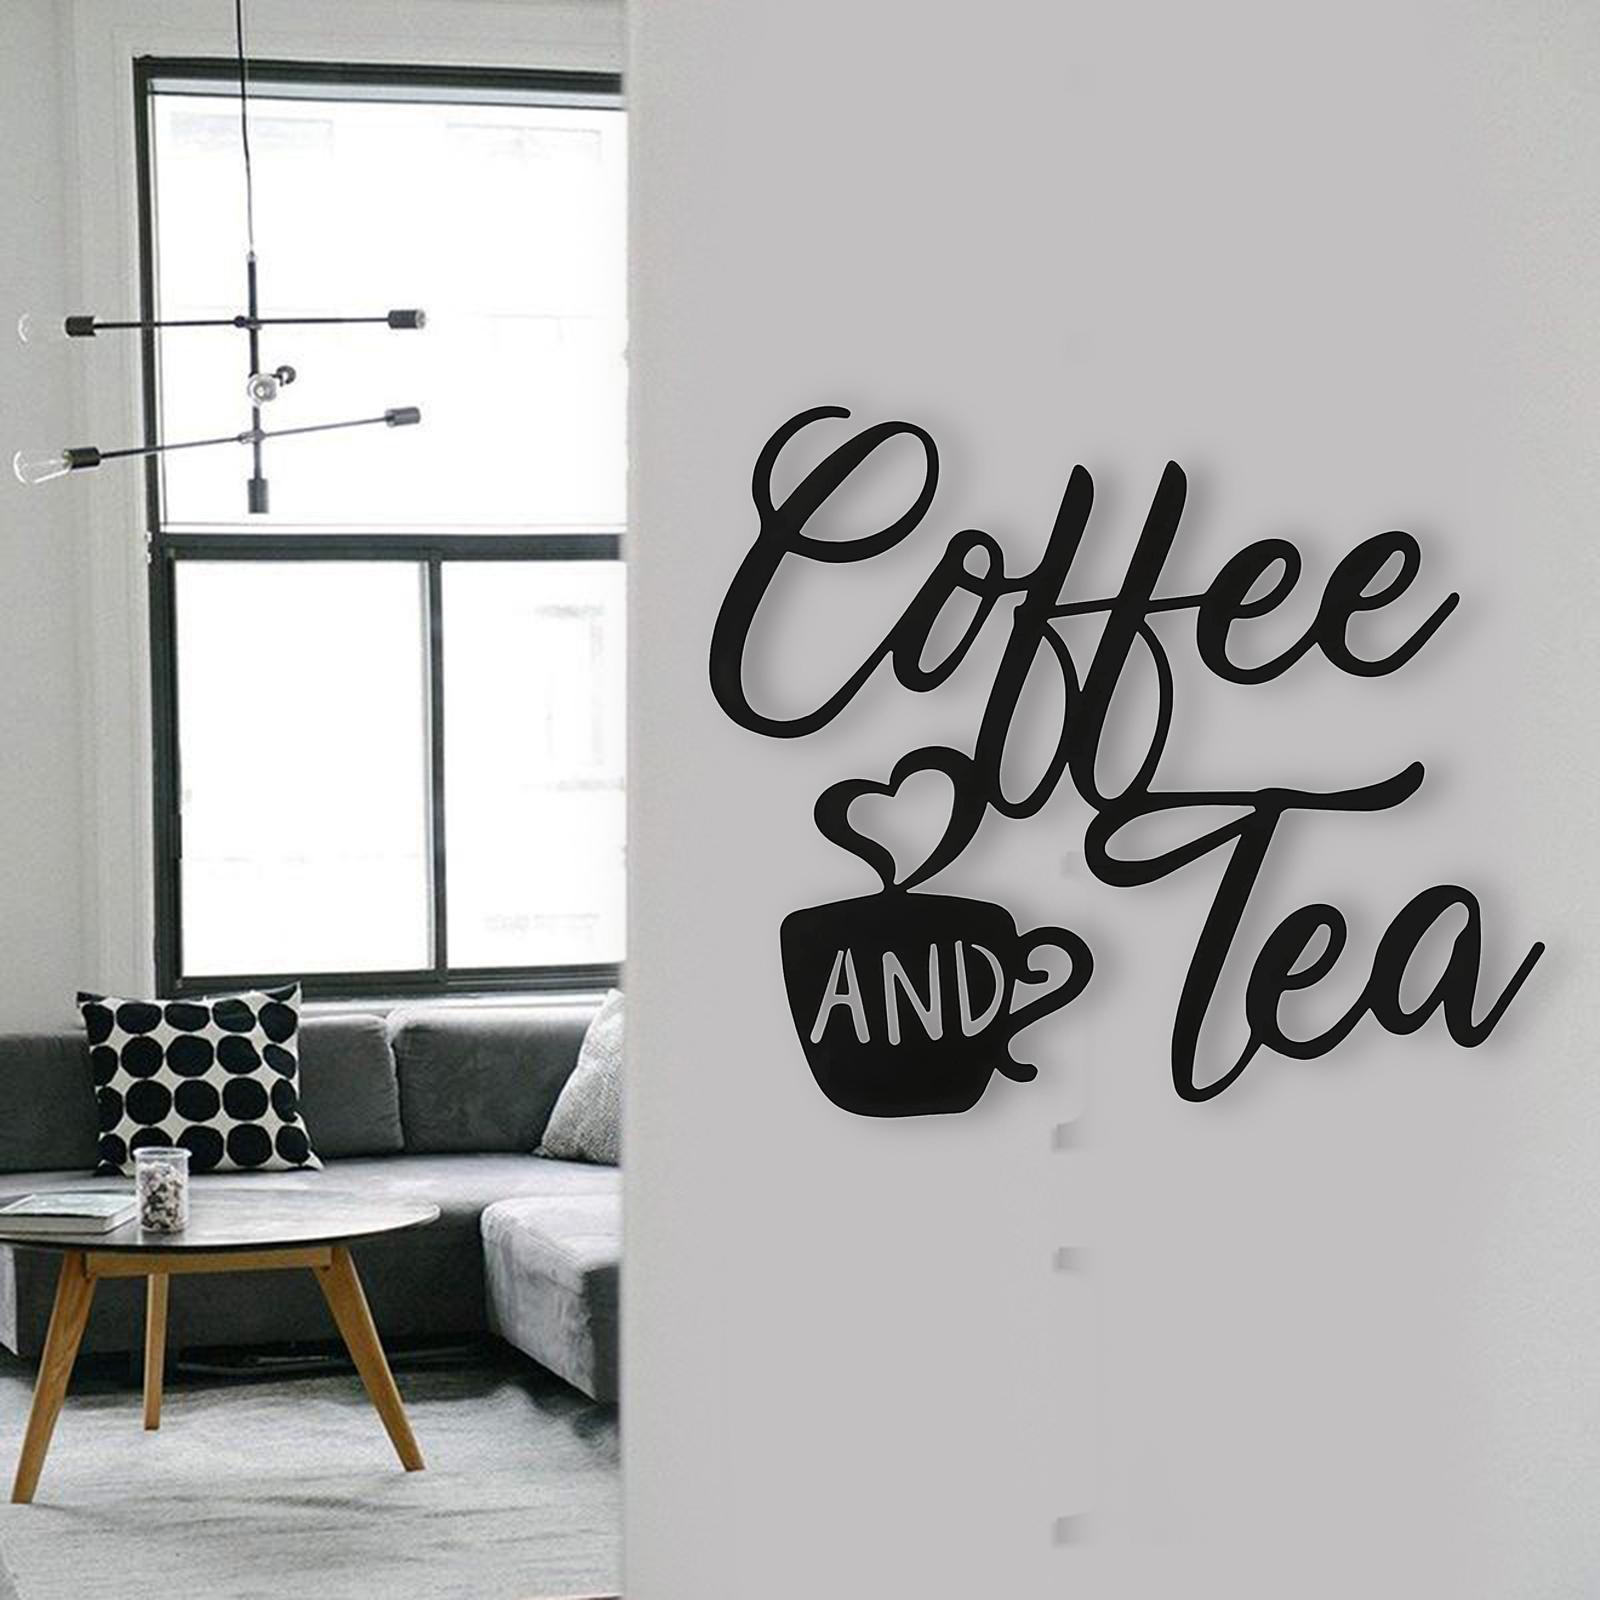 Coffee and Tea Bar Sign Metal Hanging Plaque for Farmhouse Decor